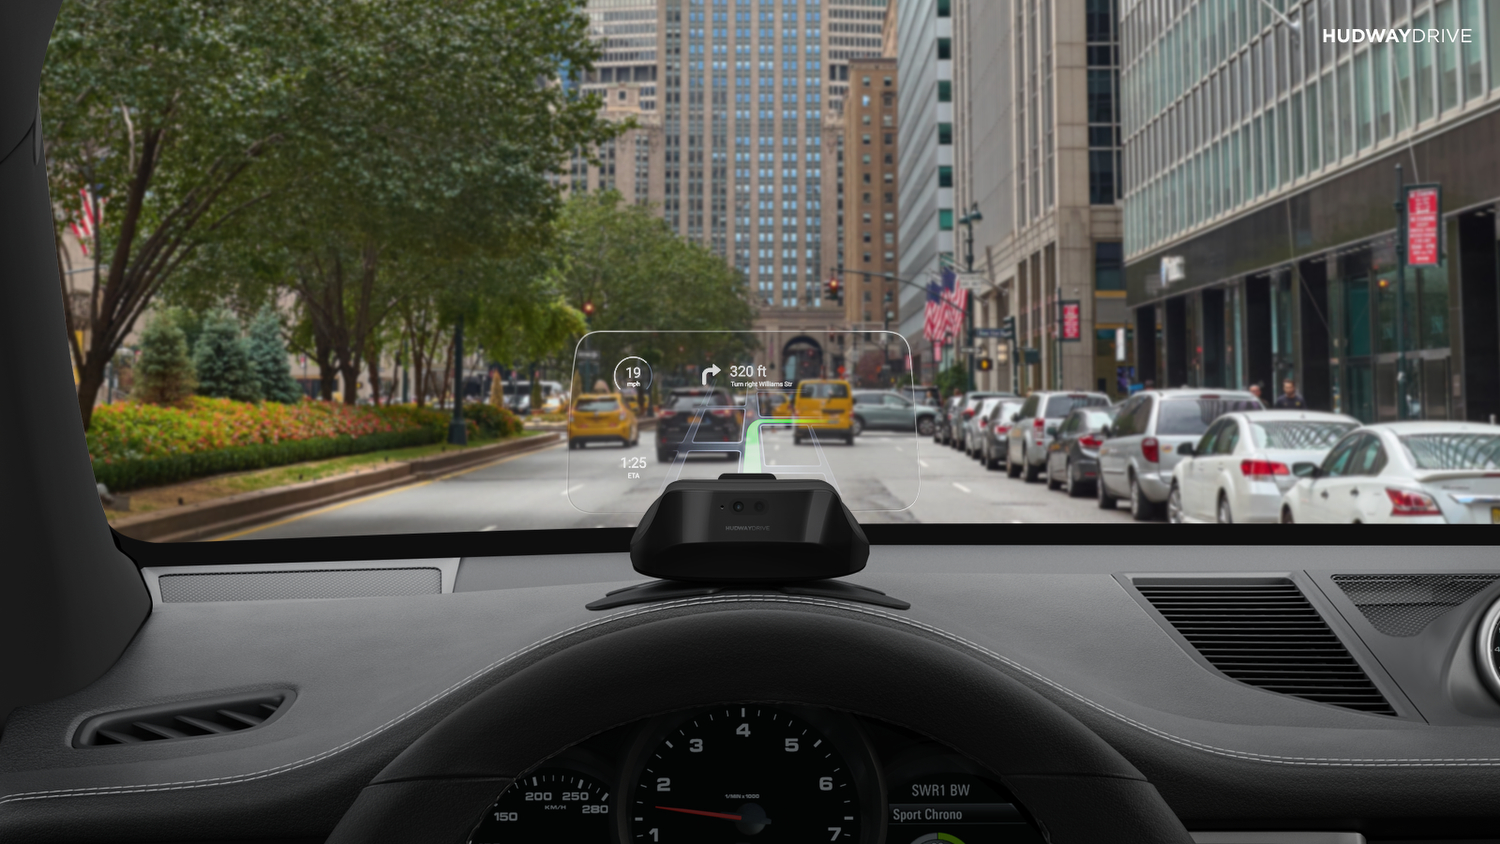 hudway drive heads up display hands on review city